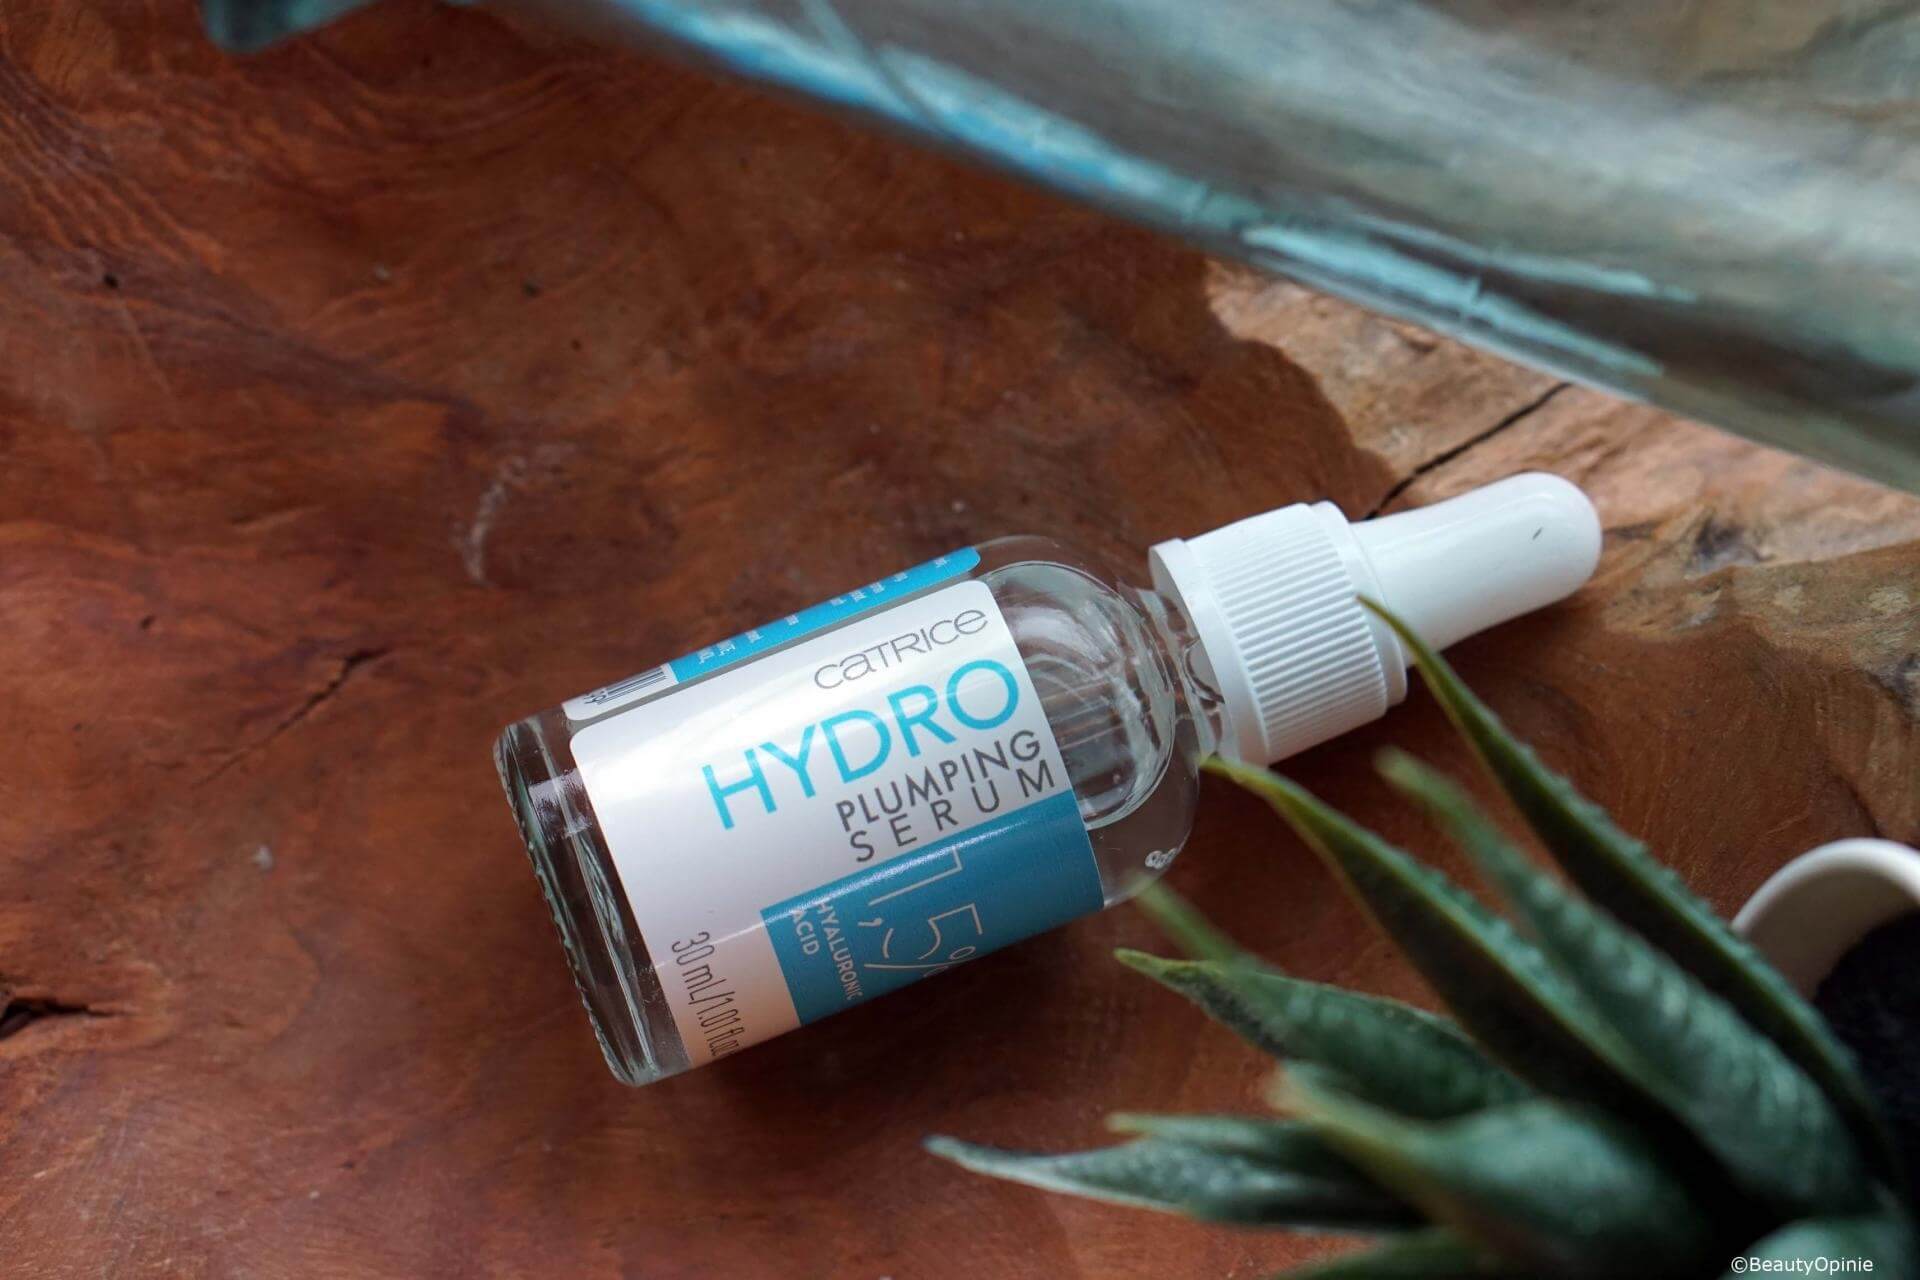 Catrice Hydro Plumping serum review